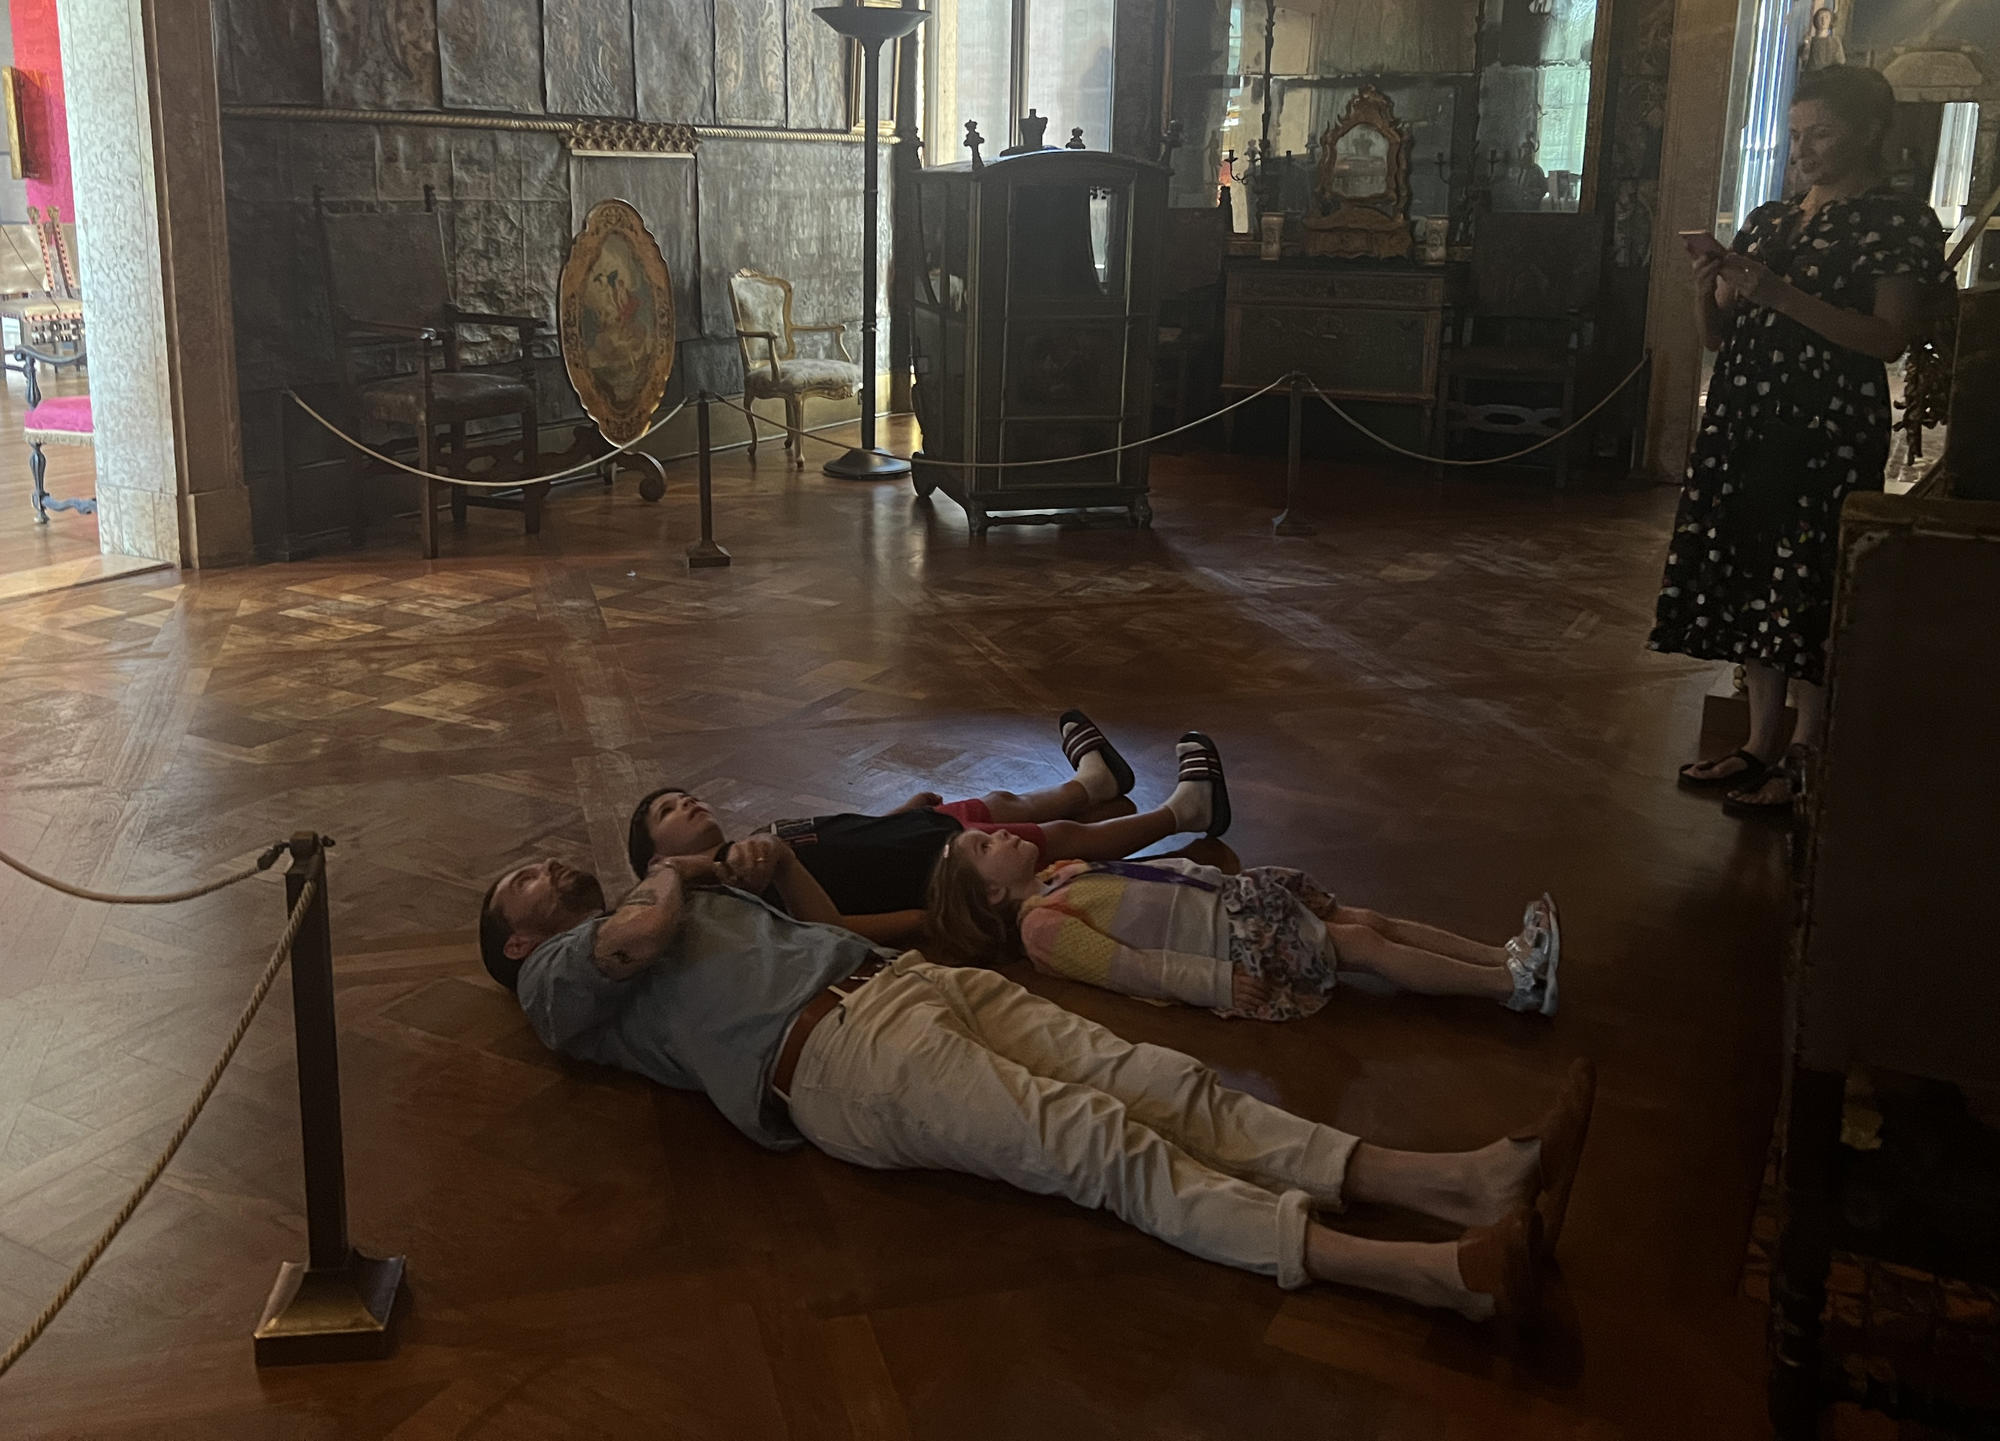 Oliver Jeffers and his family enjoying Paolo Veronese’s "Coronation of Hebe", a large painting that Isabella Stewart Gardner installed on the ceiling of the Veronese Room.